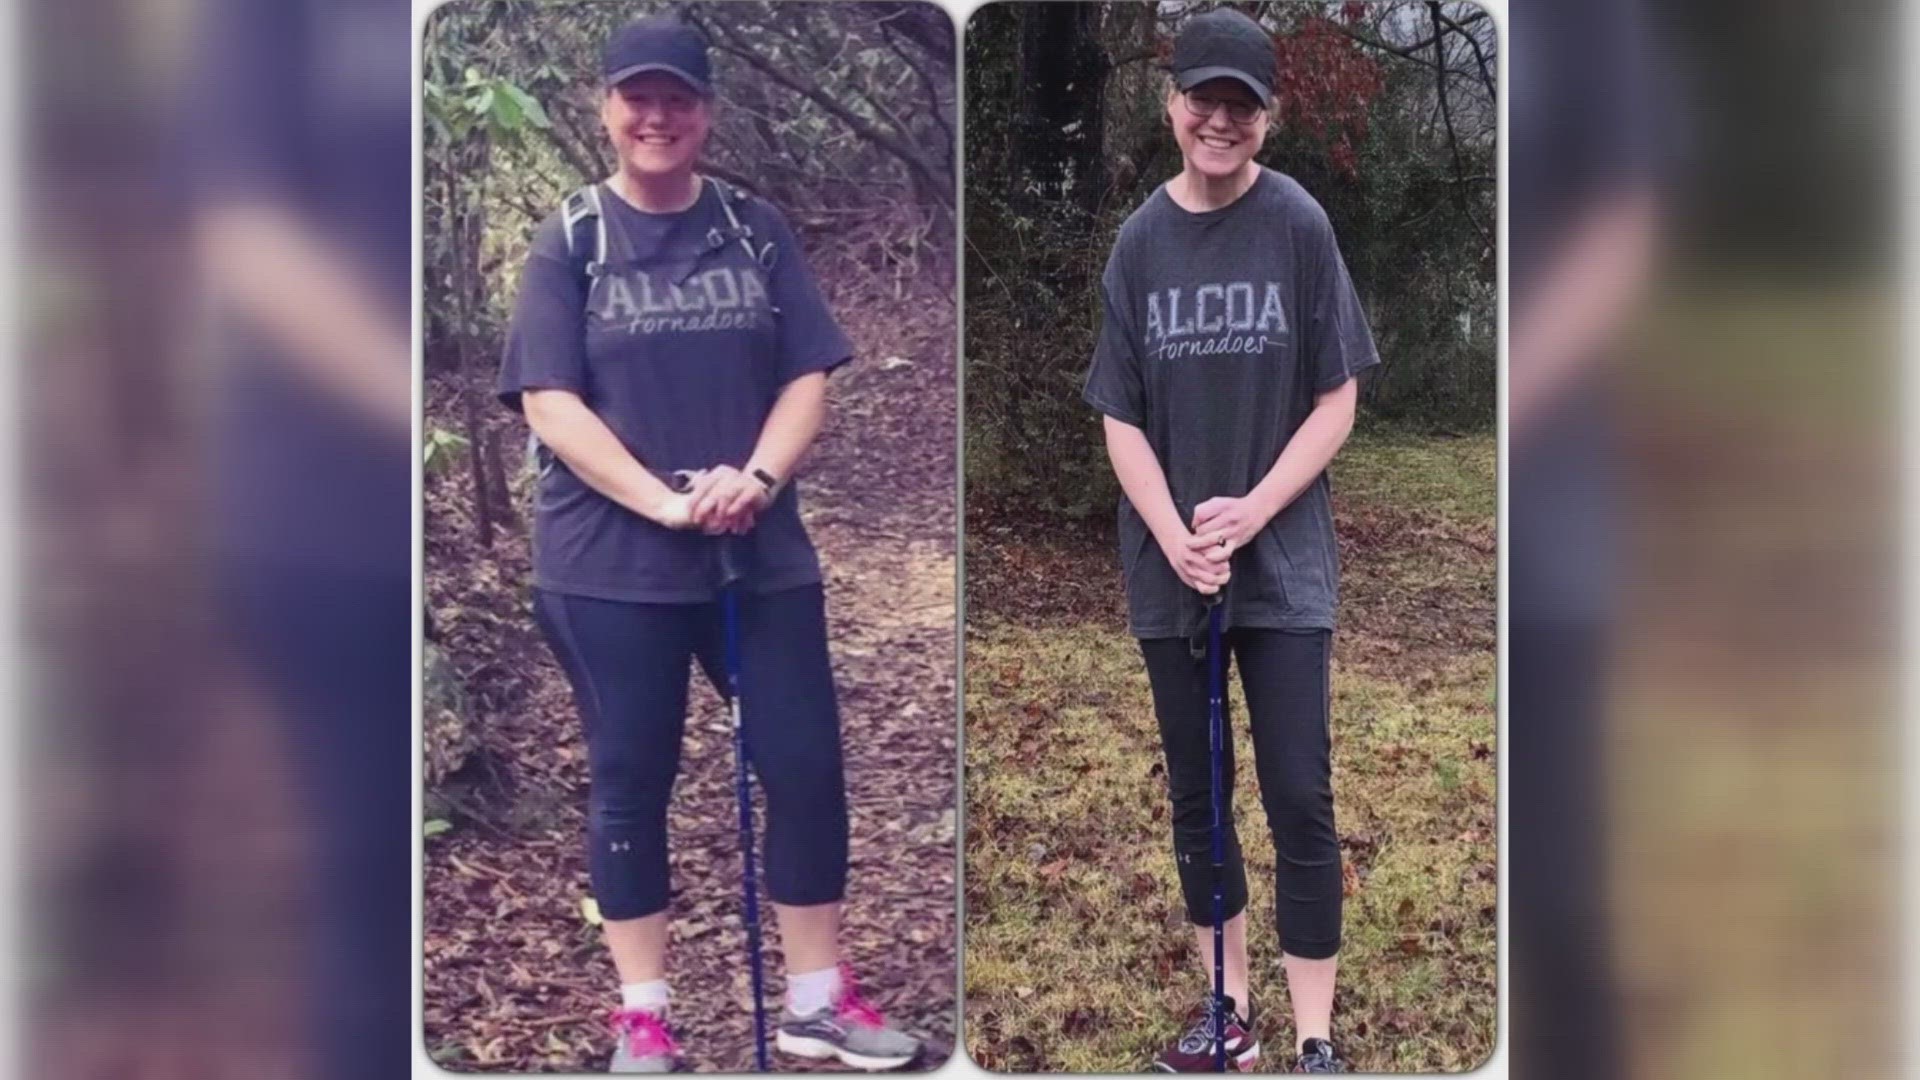 Melissa Coatney began hiking after she decided to change to a healthy lifestyle.